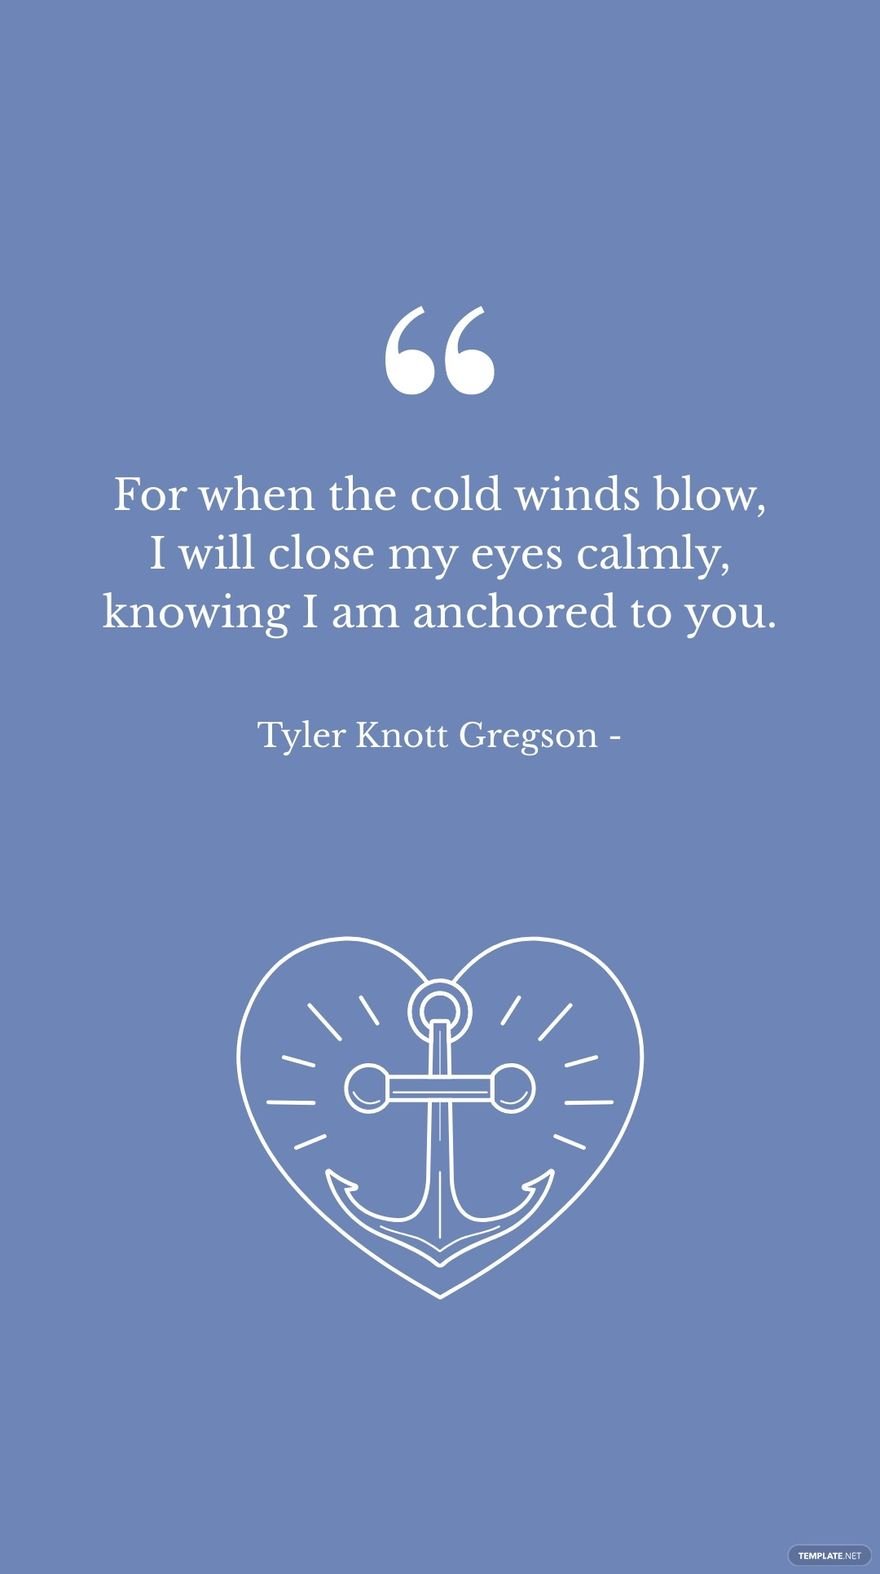 Free Tyler Knott Gregson - For when the cold winds blow, I will close my eyes calmly, knowing I am anchored to you. in JPG